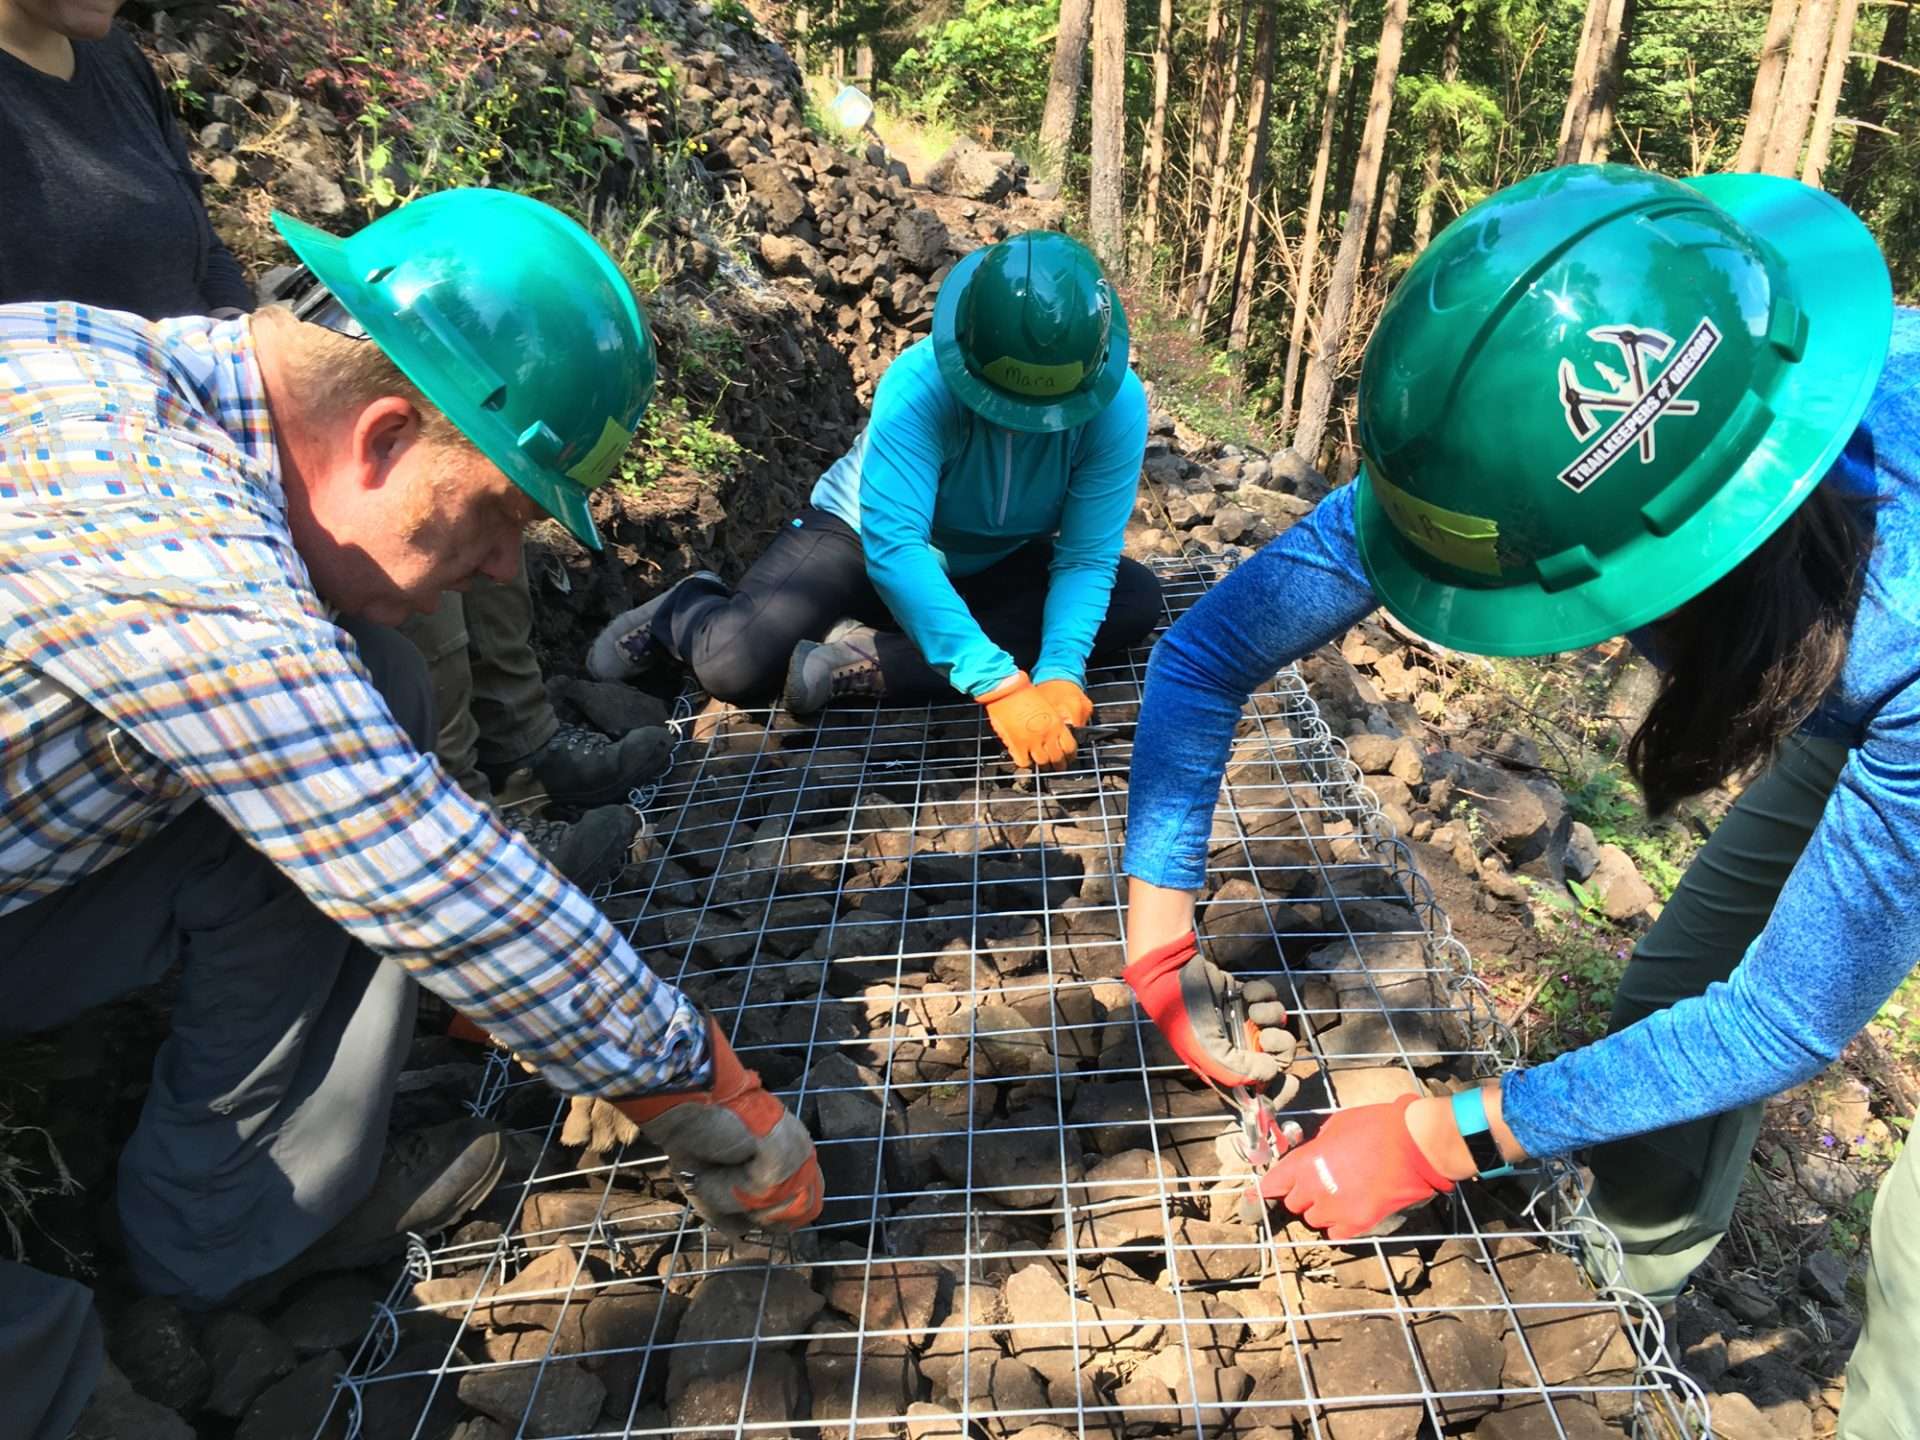 Three people in green hard hats leaning over a metal grid with rocks beneath it.